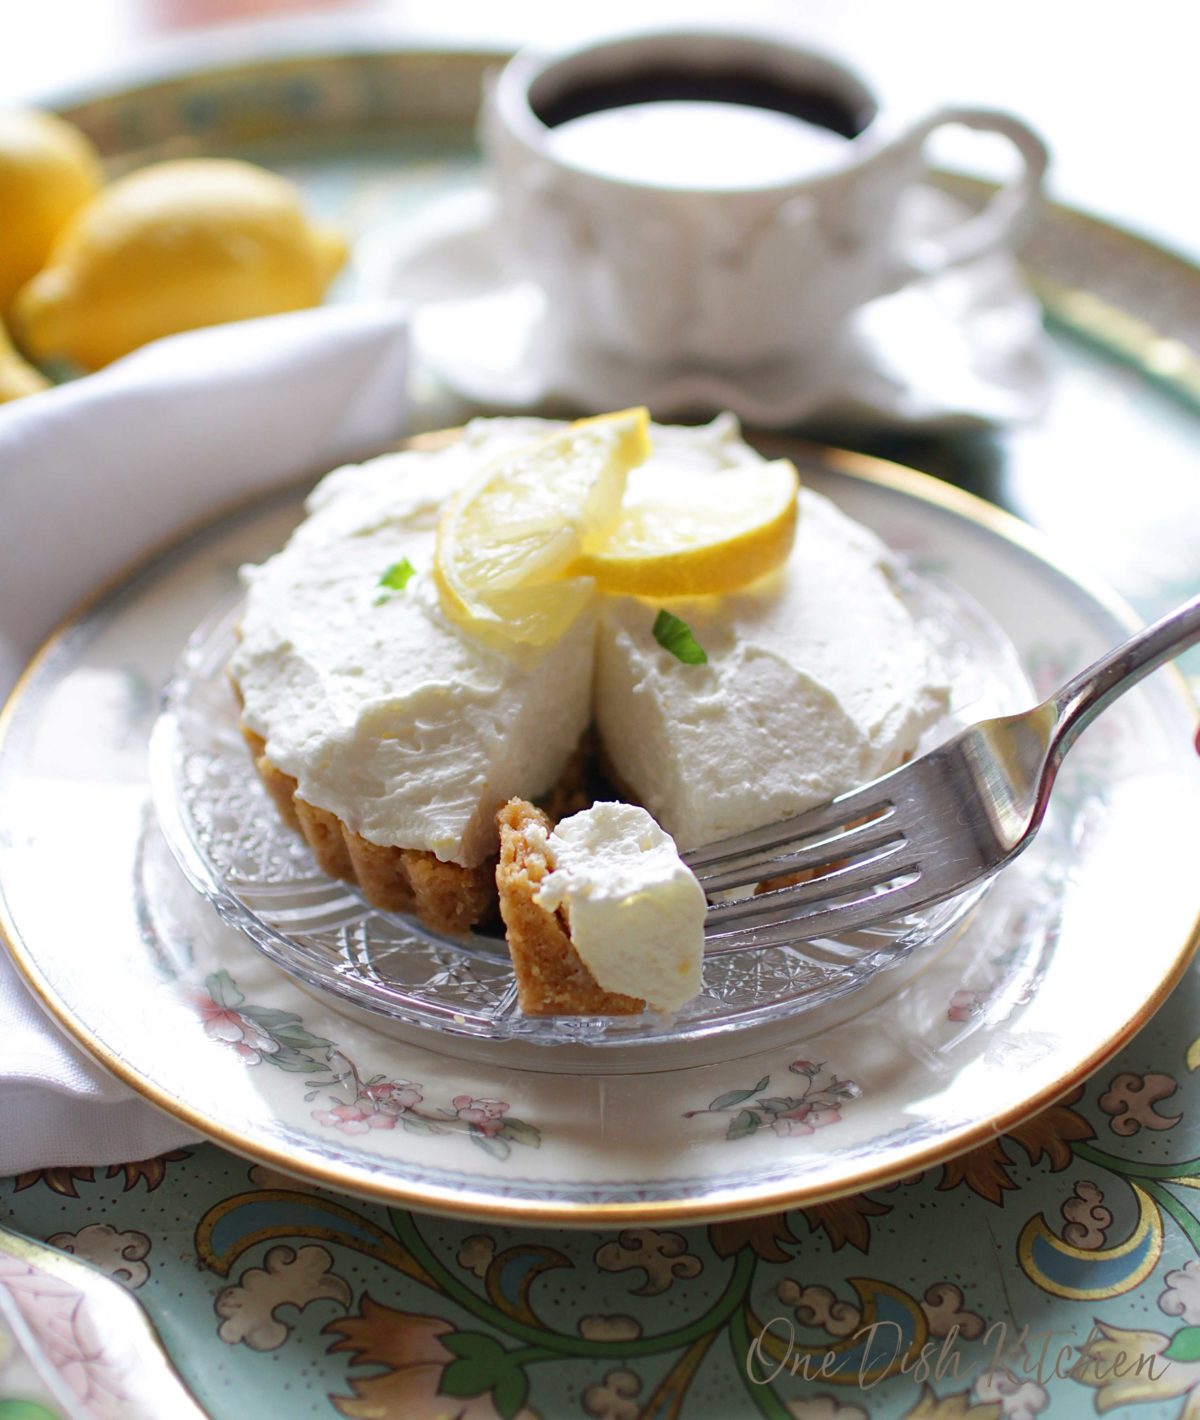 Forkful of lemon cheesecake mousse on a glass plate with whole lemons and a mug of coffee on a metal tray